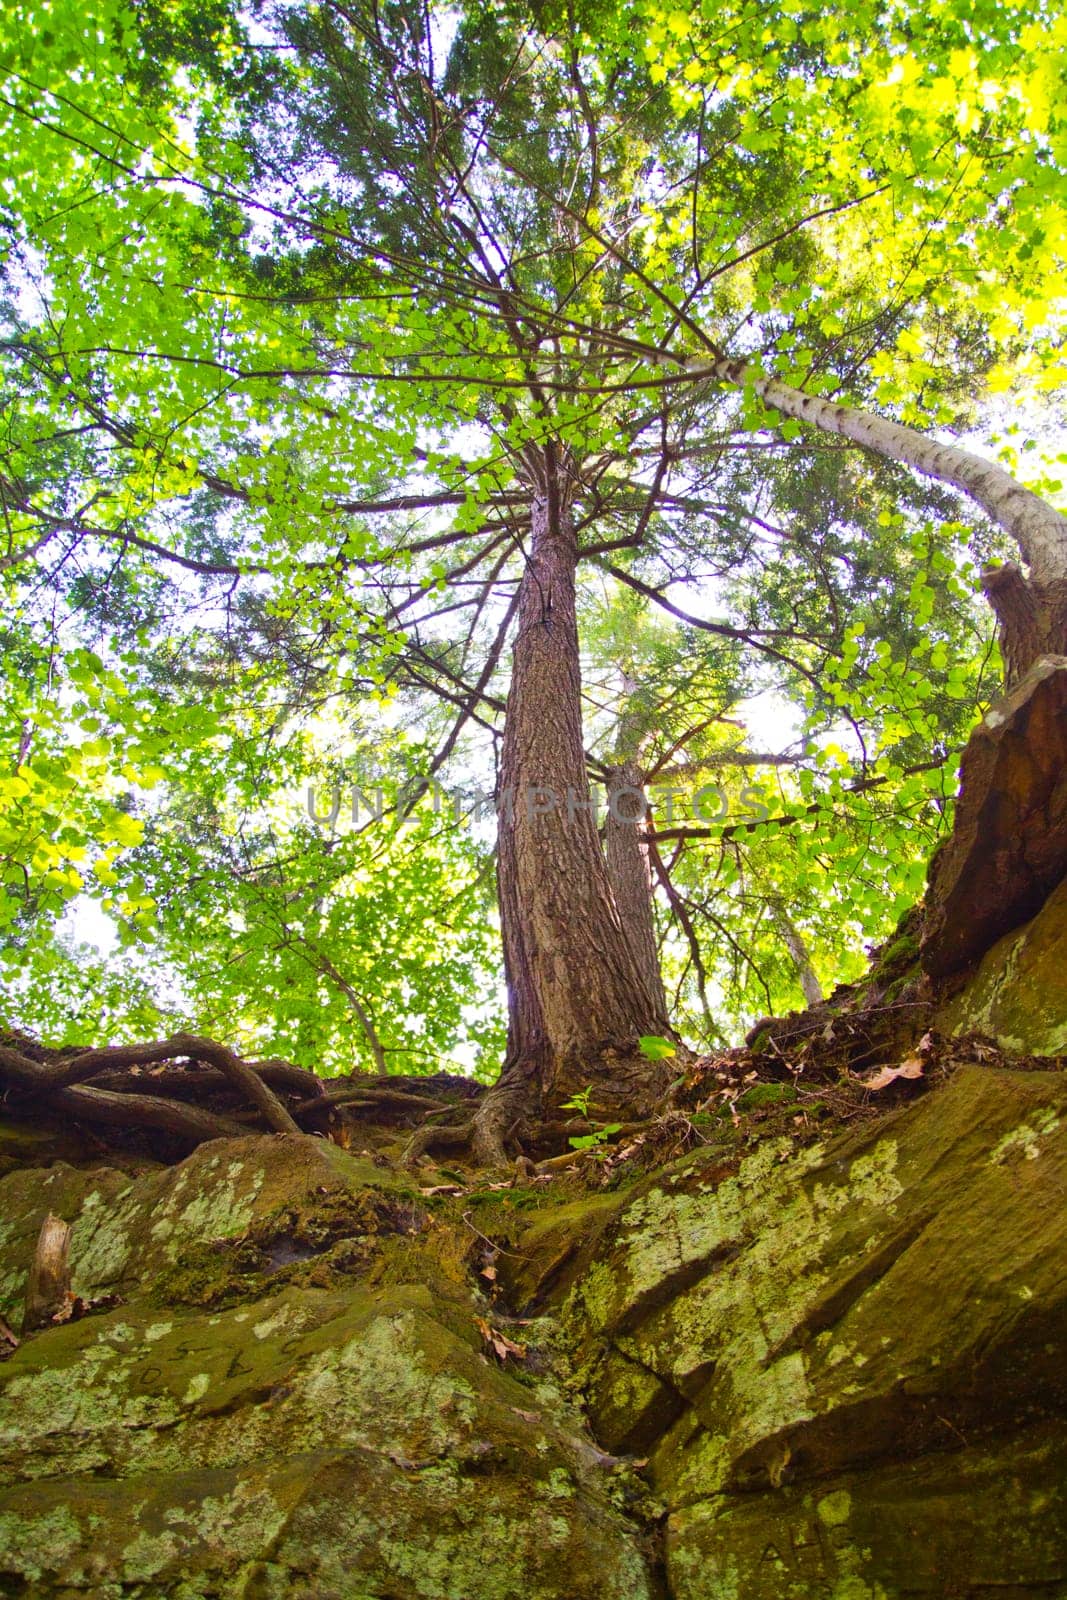 Immersive Nature: Majestic Tree of Life stands tall in verdant forest, its roots gripping moss-covered rocks. Dappled light filters through lush canopy, creating a serene atmosphere. Fitzgerald County Park, Lansing, Michigan.